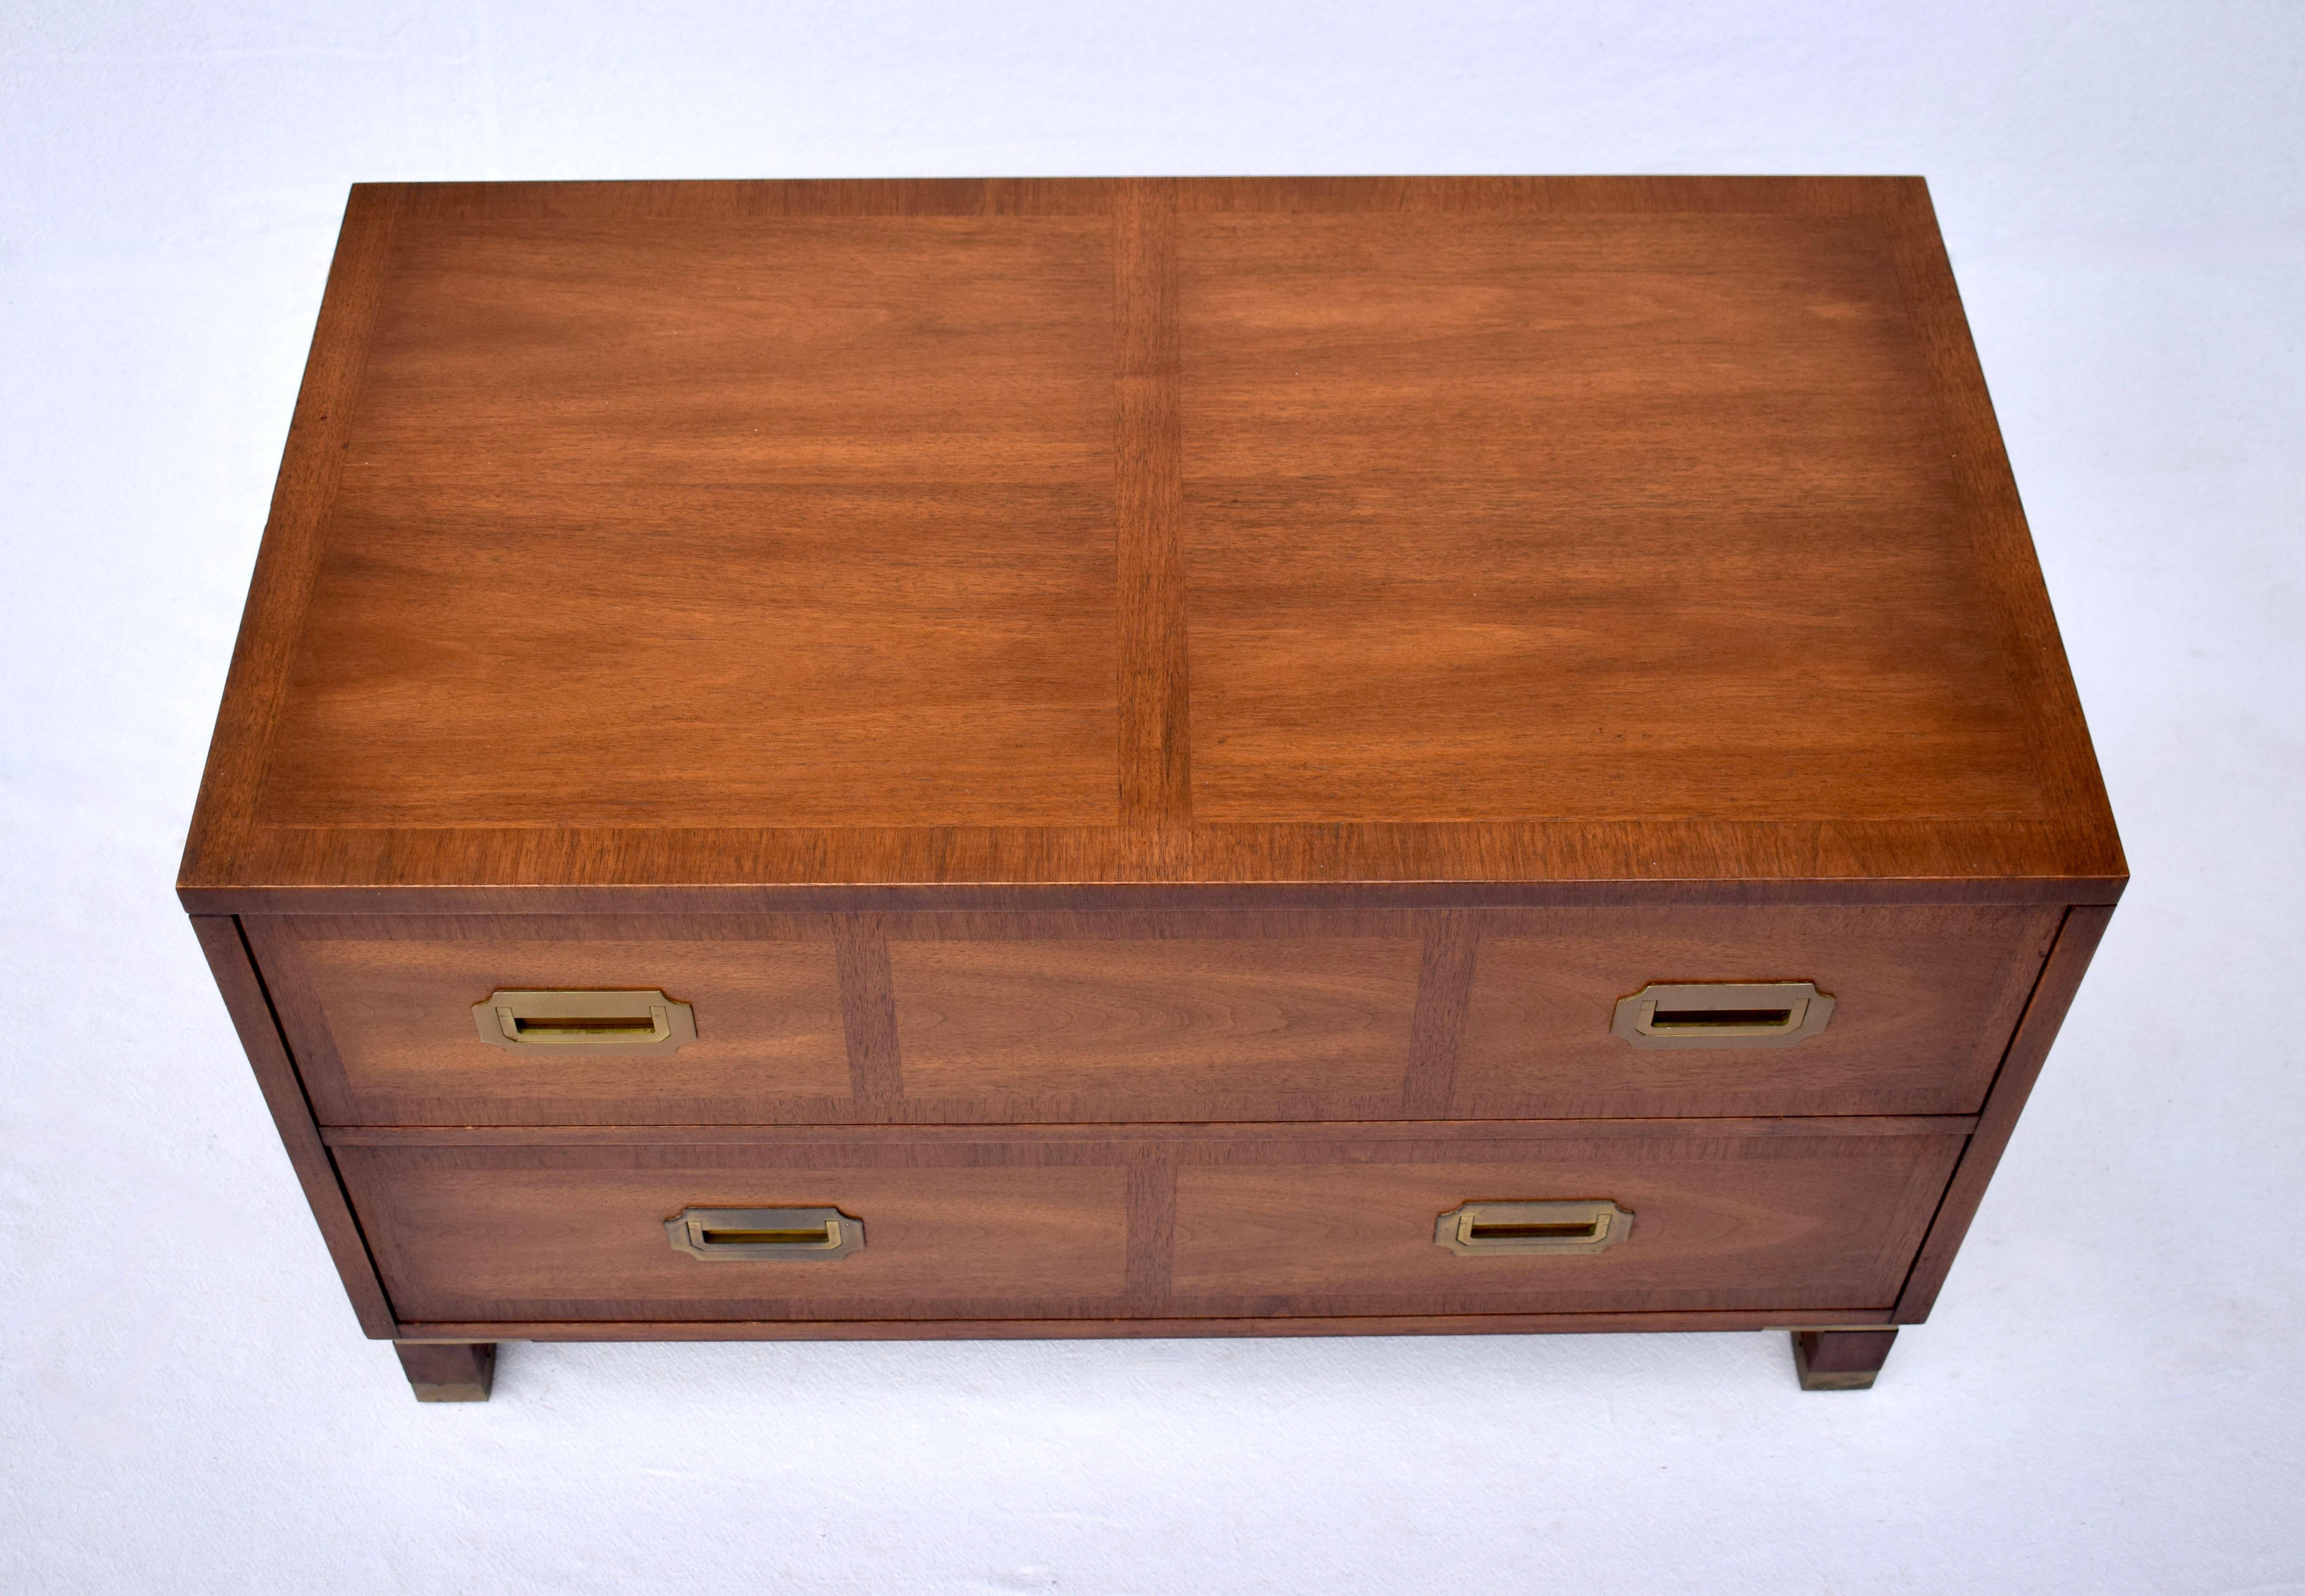 Baker Campaign style chest of two generously sized drawers with handsome banded walnut top & front. Original brass hardware enhances striking walnut grains. Nice multifunctional storage  suitable in a wide variety of settings.